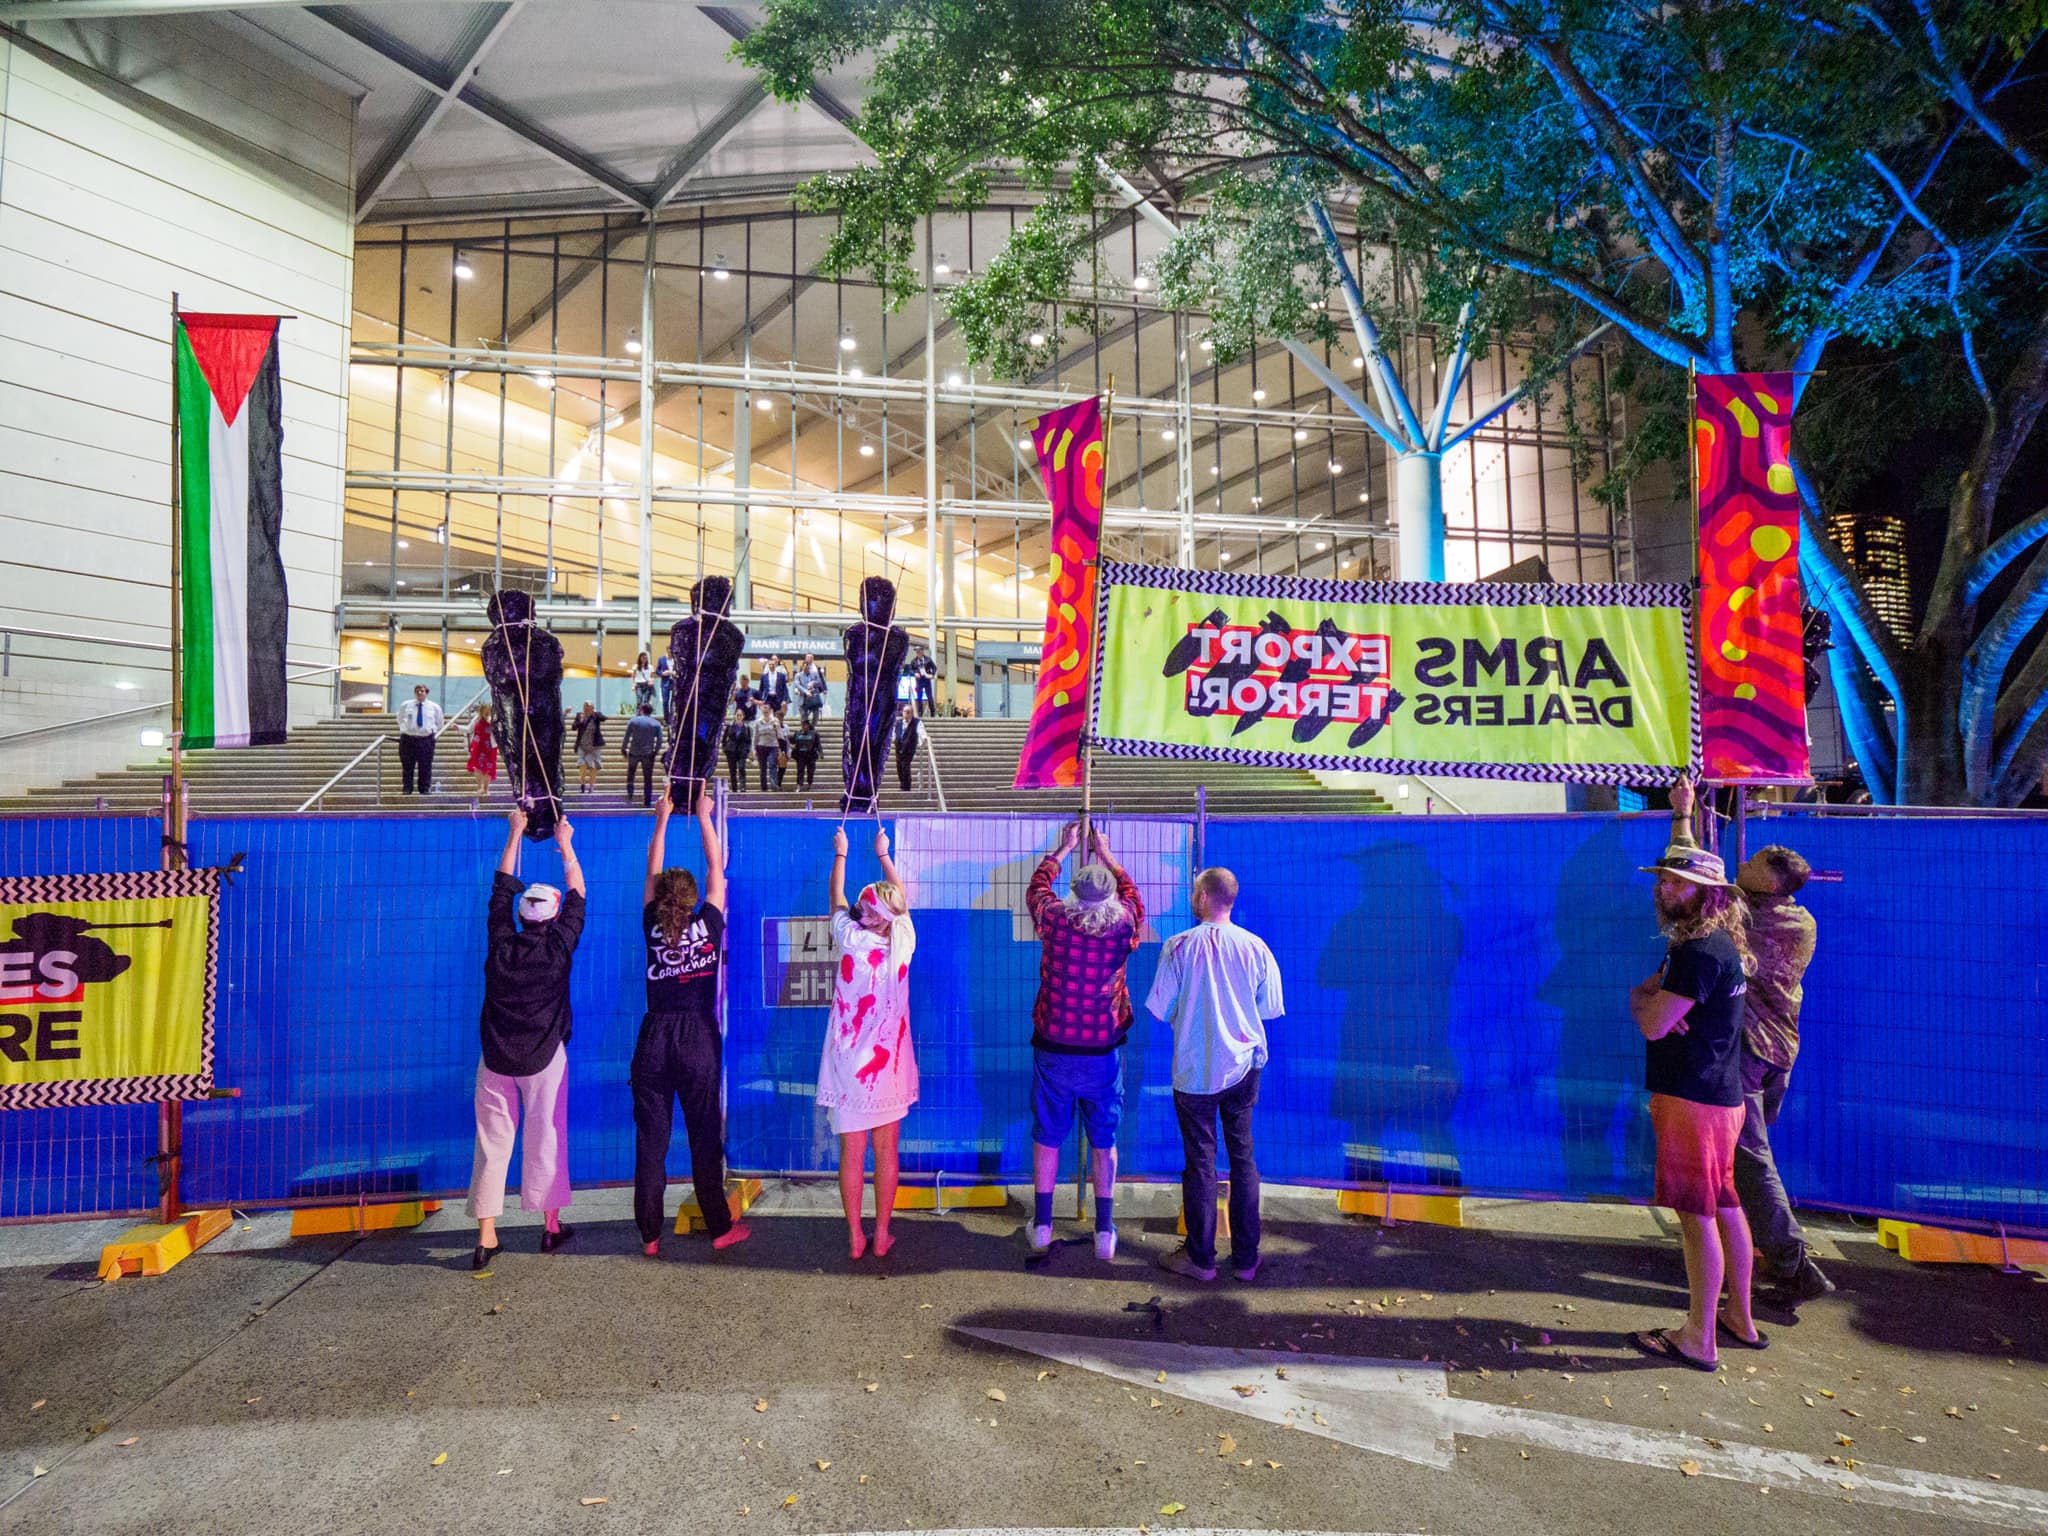 A photograph of protestors peacefully demonstrating outside the Brisbane Convention Centre where Land Forces is being held. Protestors are prevented from getting closer by a tall blue barricade, but they hold up black fibreglass casts of the figures of children and a colourful banner that reads 'Arms Dealers Export Terror!' A Palestinian flag hangs vertically to the left of the protestors.